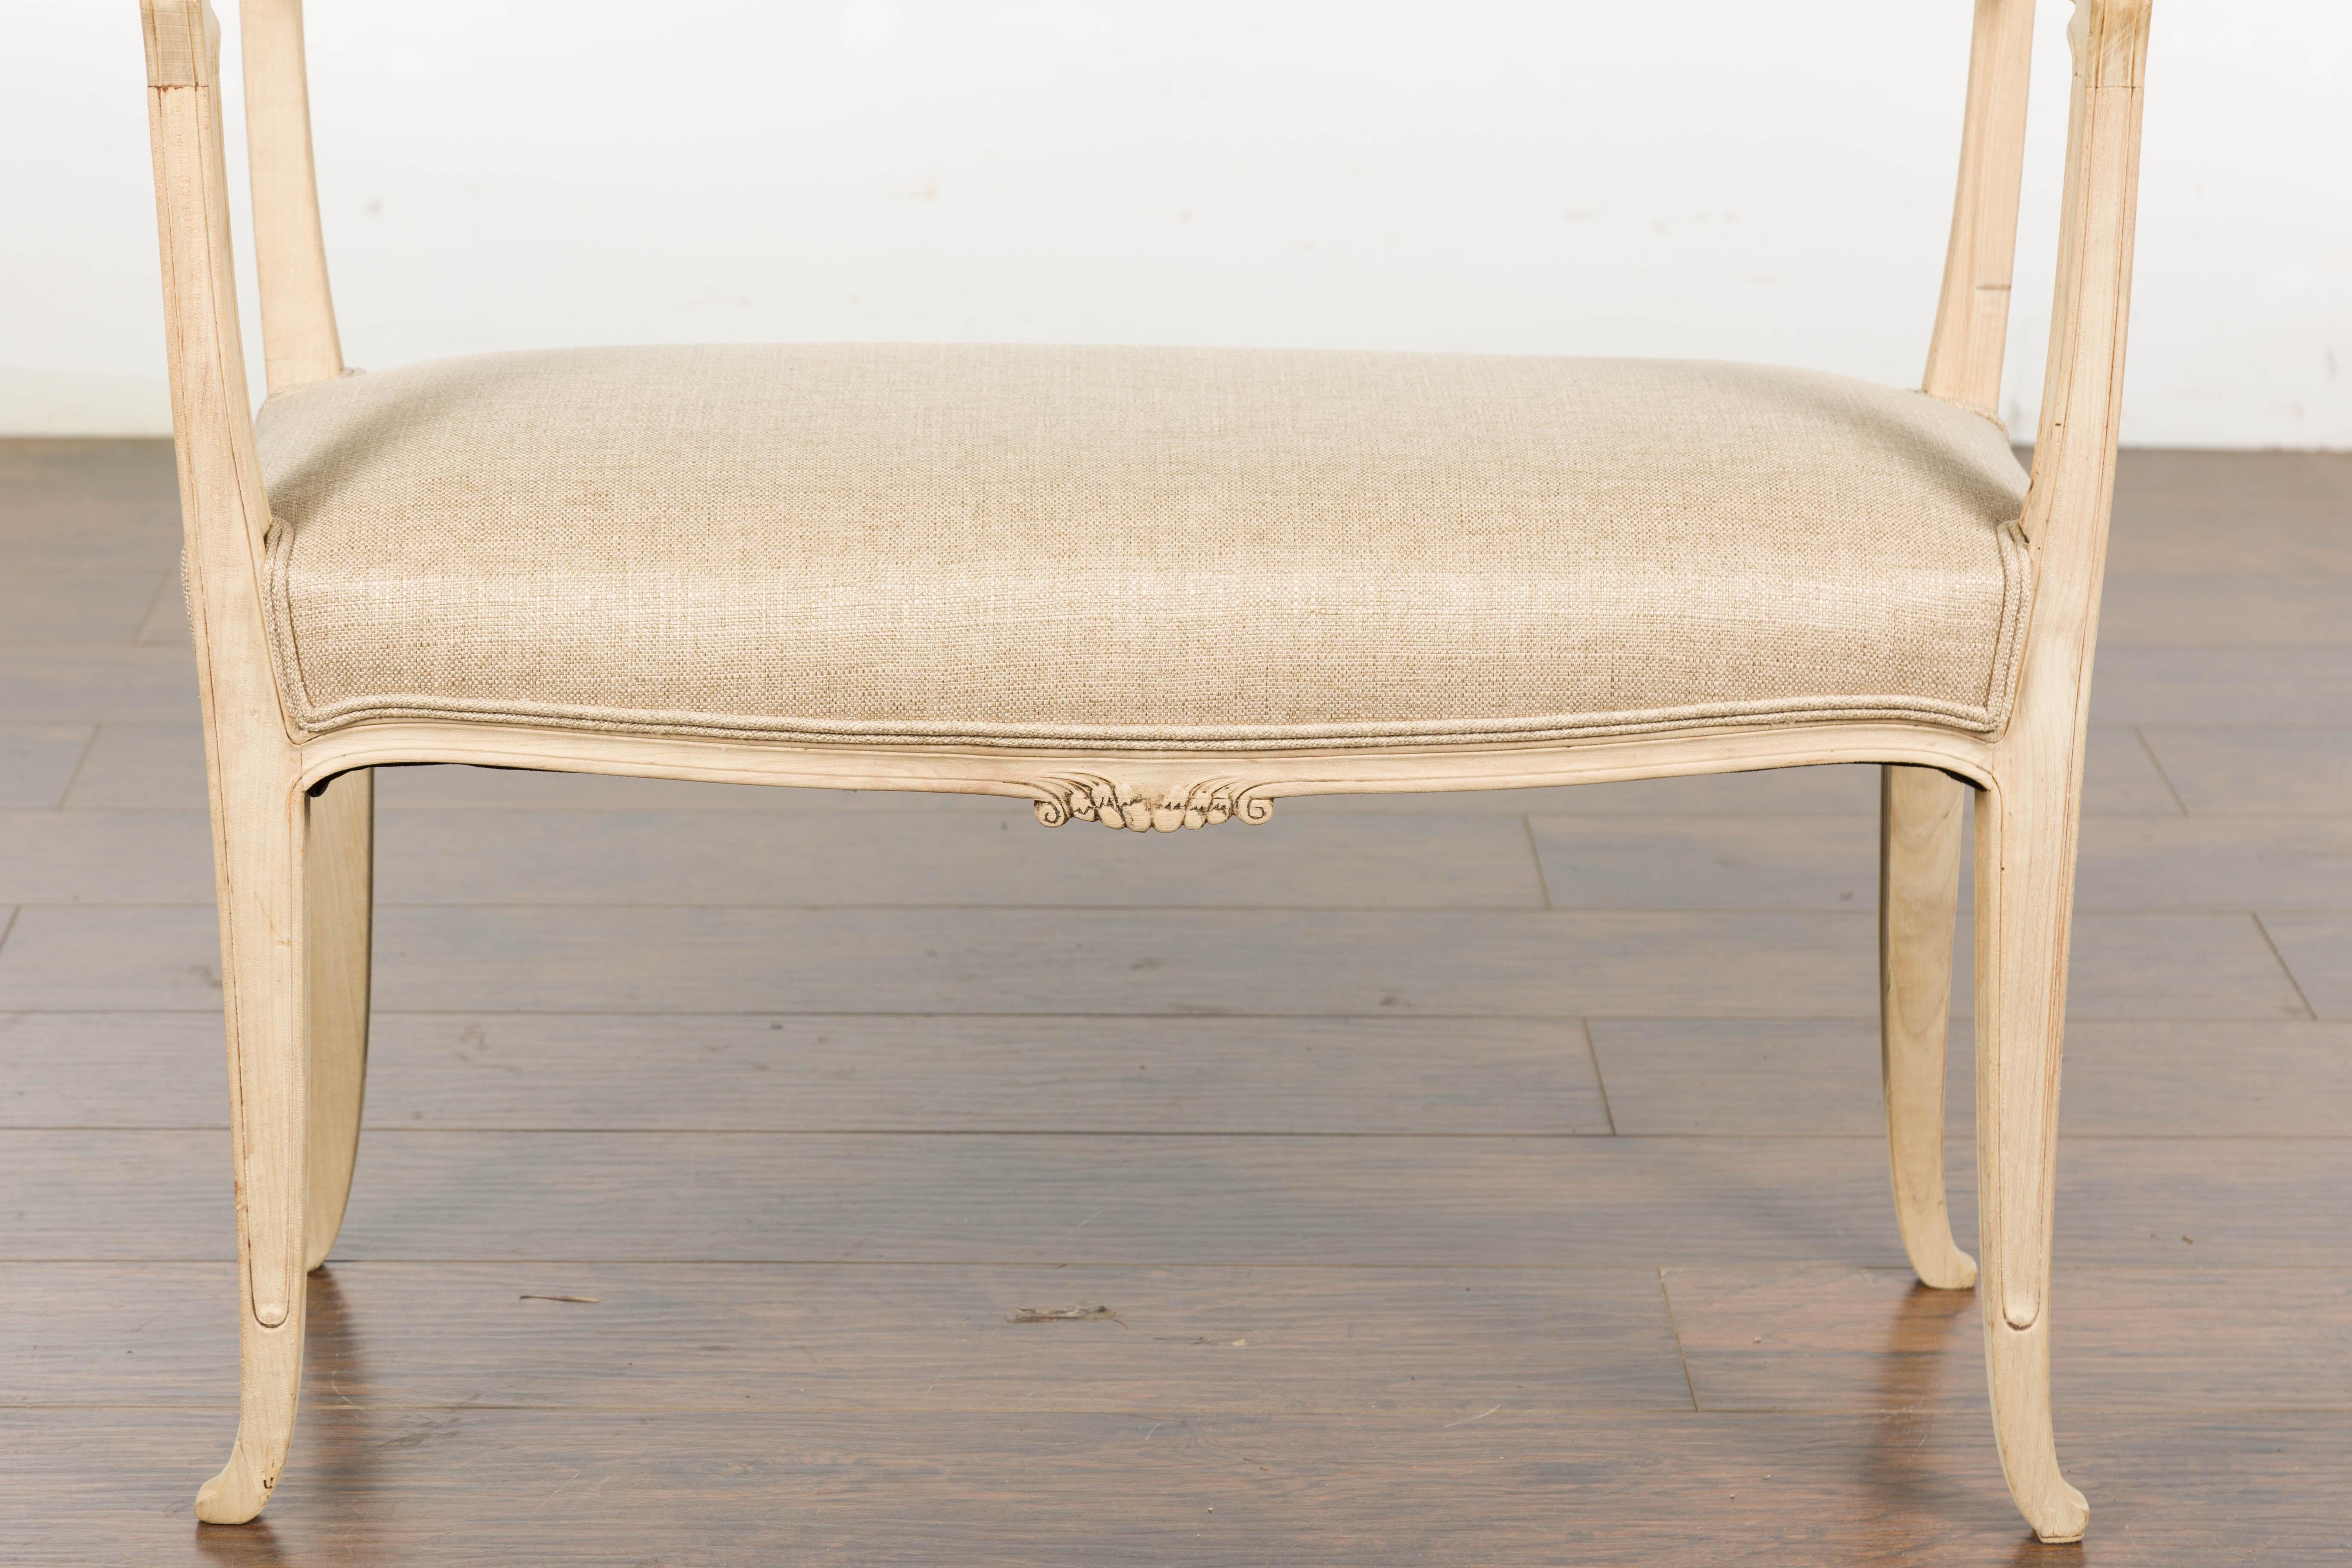 20th Century 1920s French Carved Walnut Upholstered Bench with Natural Finish For Sale